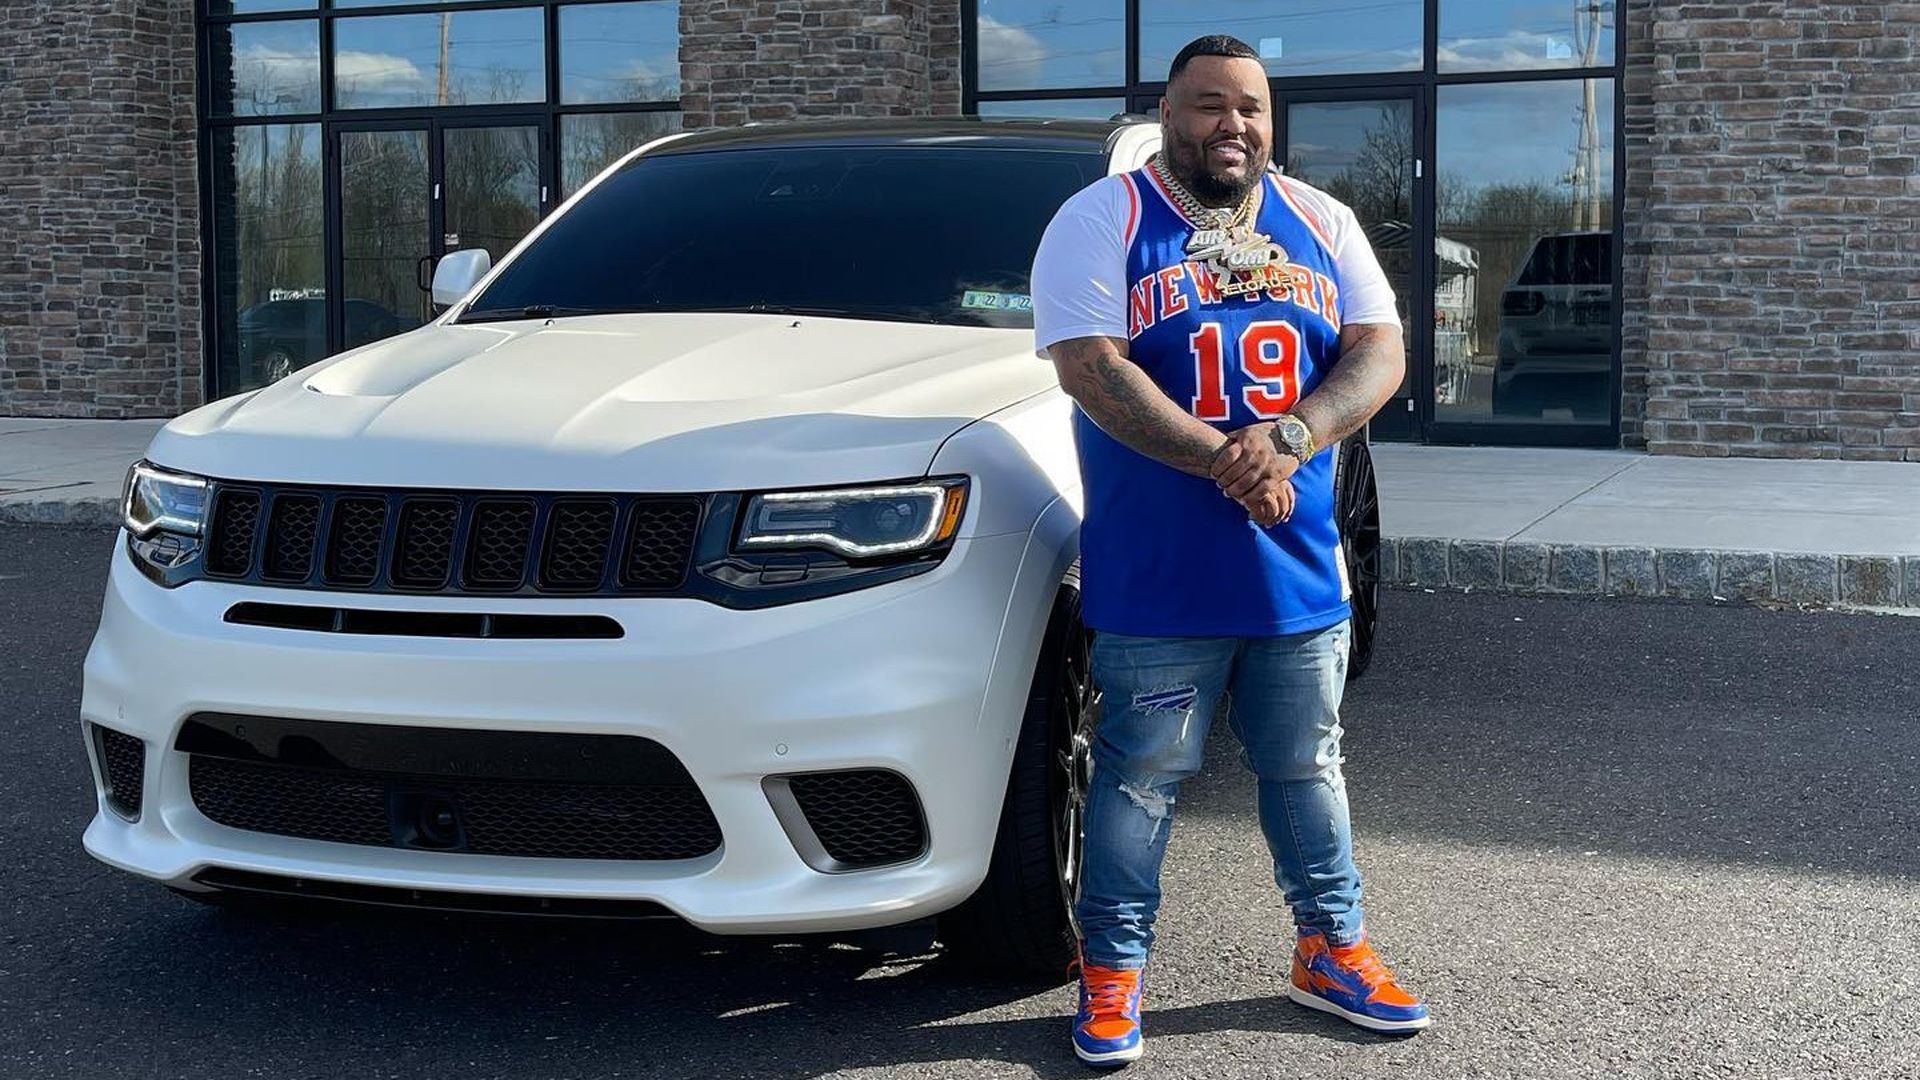 YouTuber Omar Carrasquillo 'Omi In A Hellcat' with his white Jeep Grand Cherokee Trackhawk